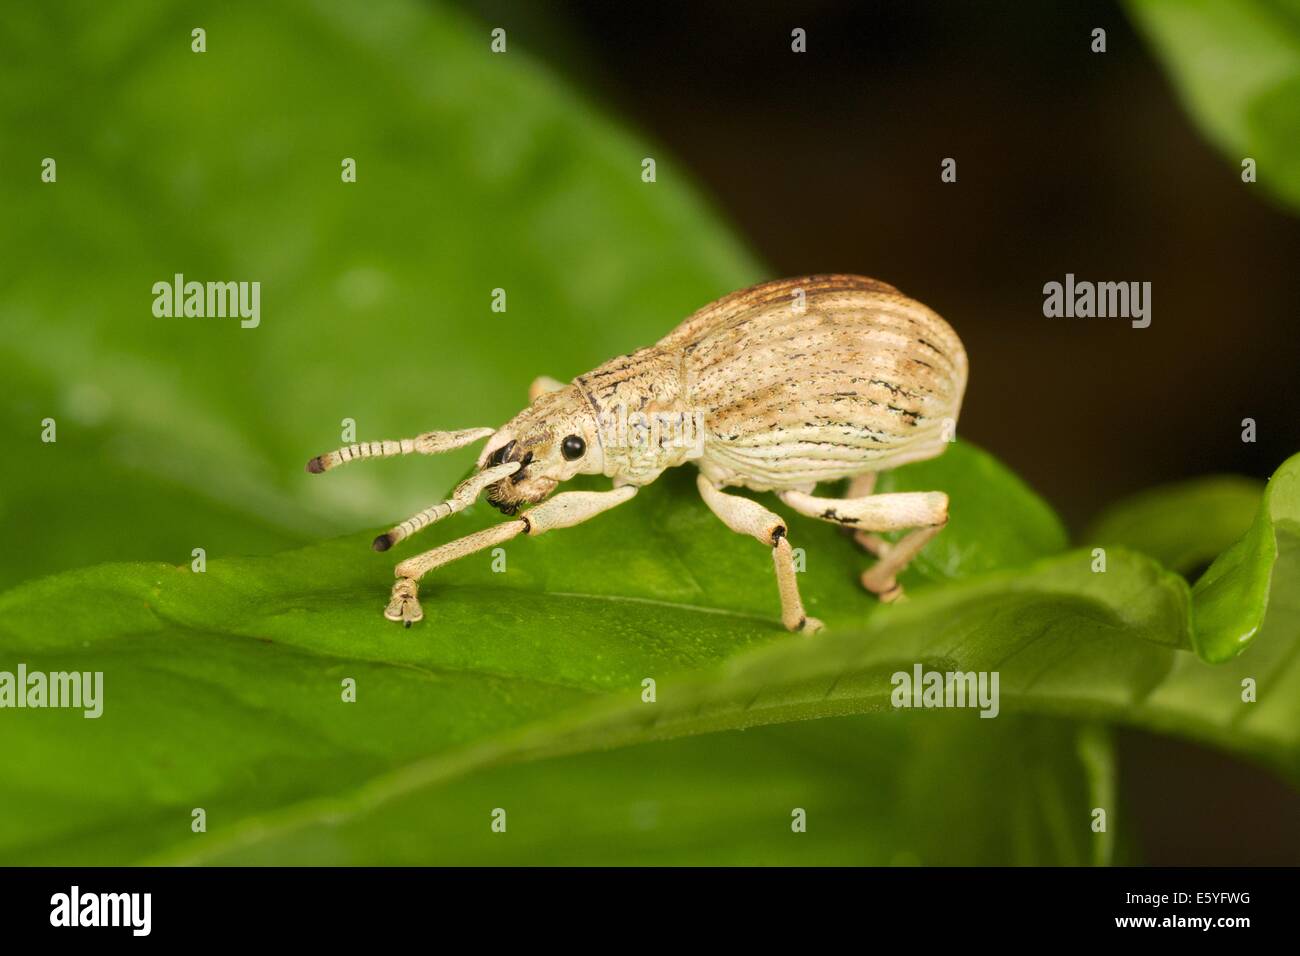 A weevil or snout beetle from the Curculionoidea superfamily. Kaeng Krachan National Park, Thailand. Stock Photo